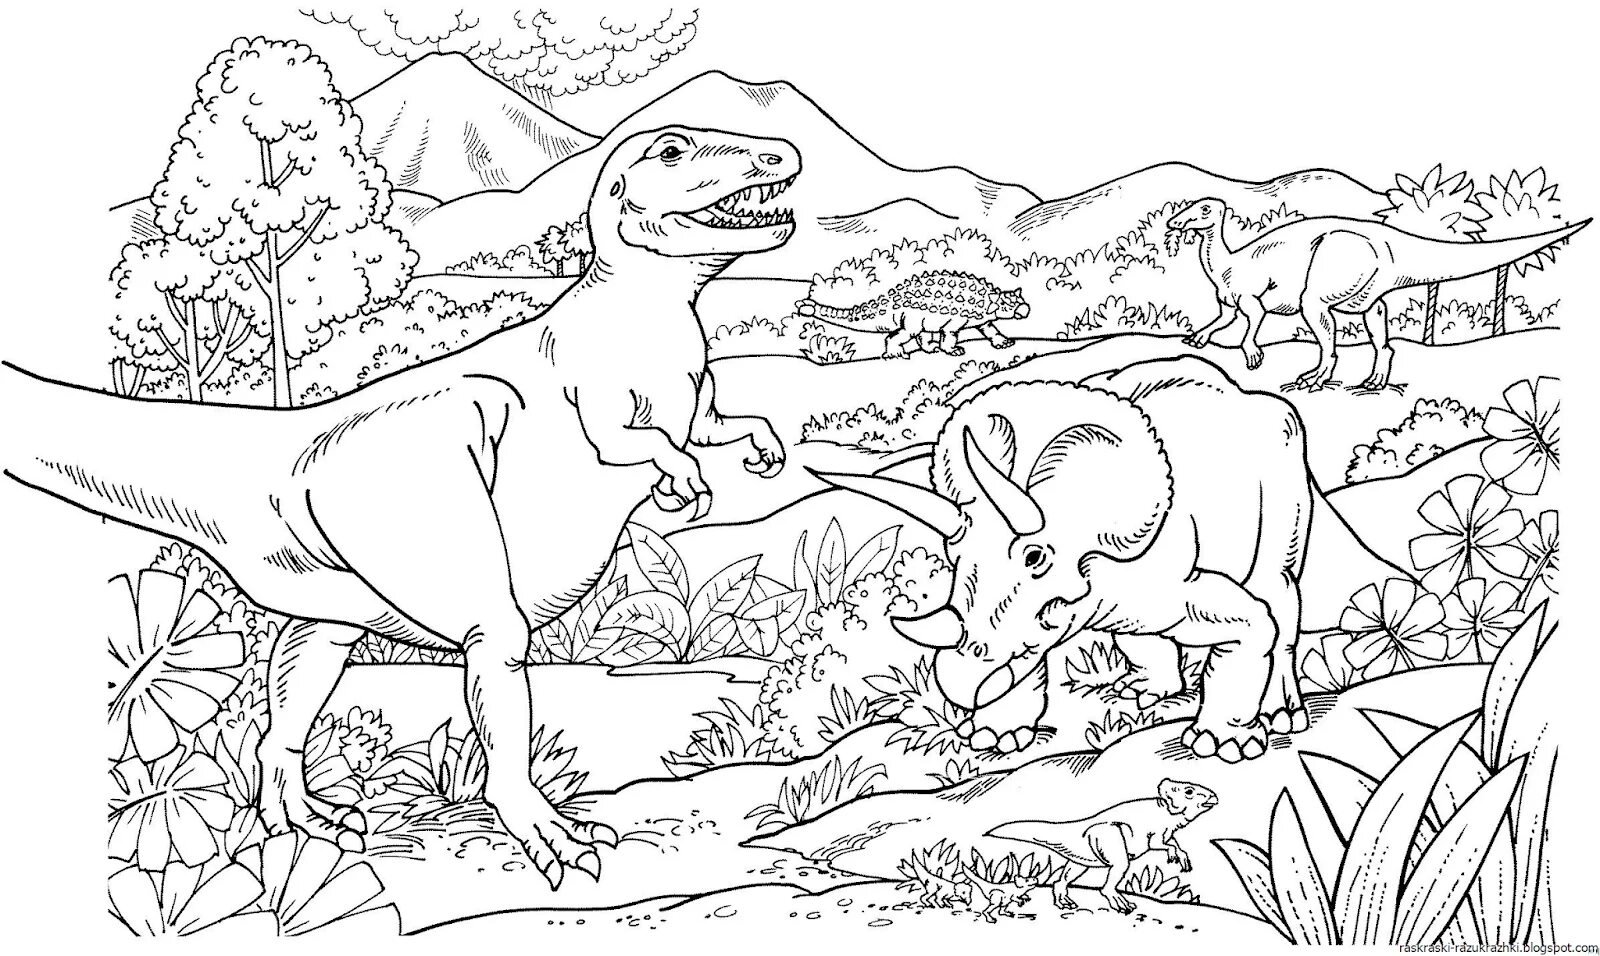 Dinosaurs for 5 year olds #16